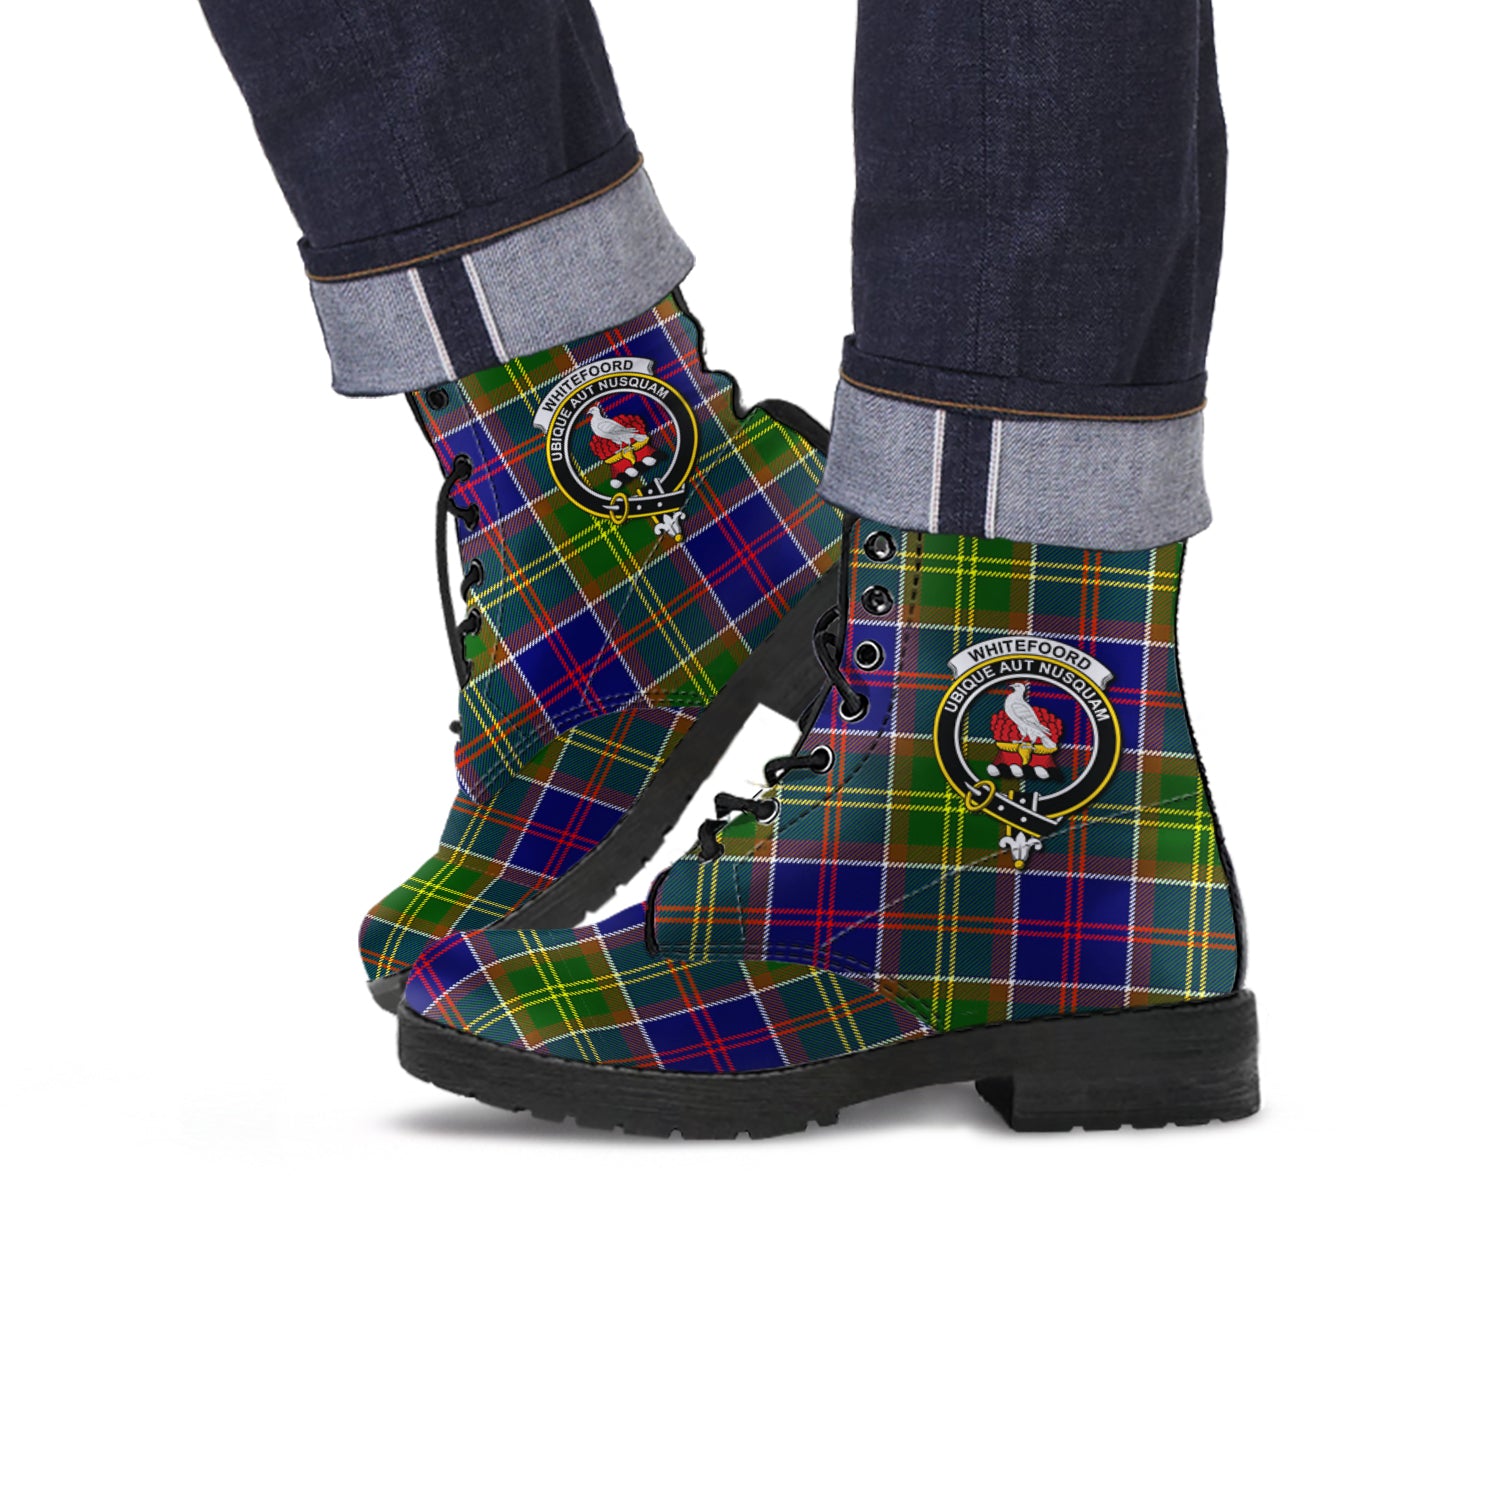 whitefoord-modern-tartan-leather-boots-with-family-crest